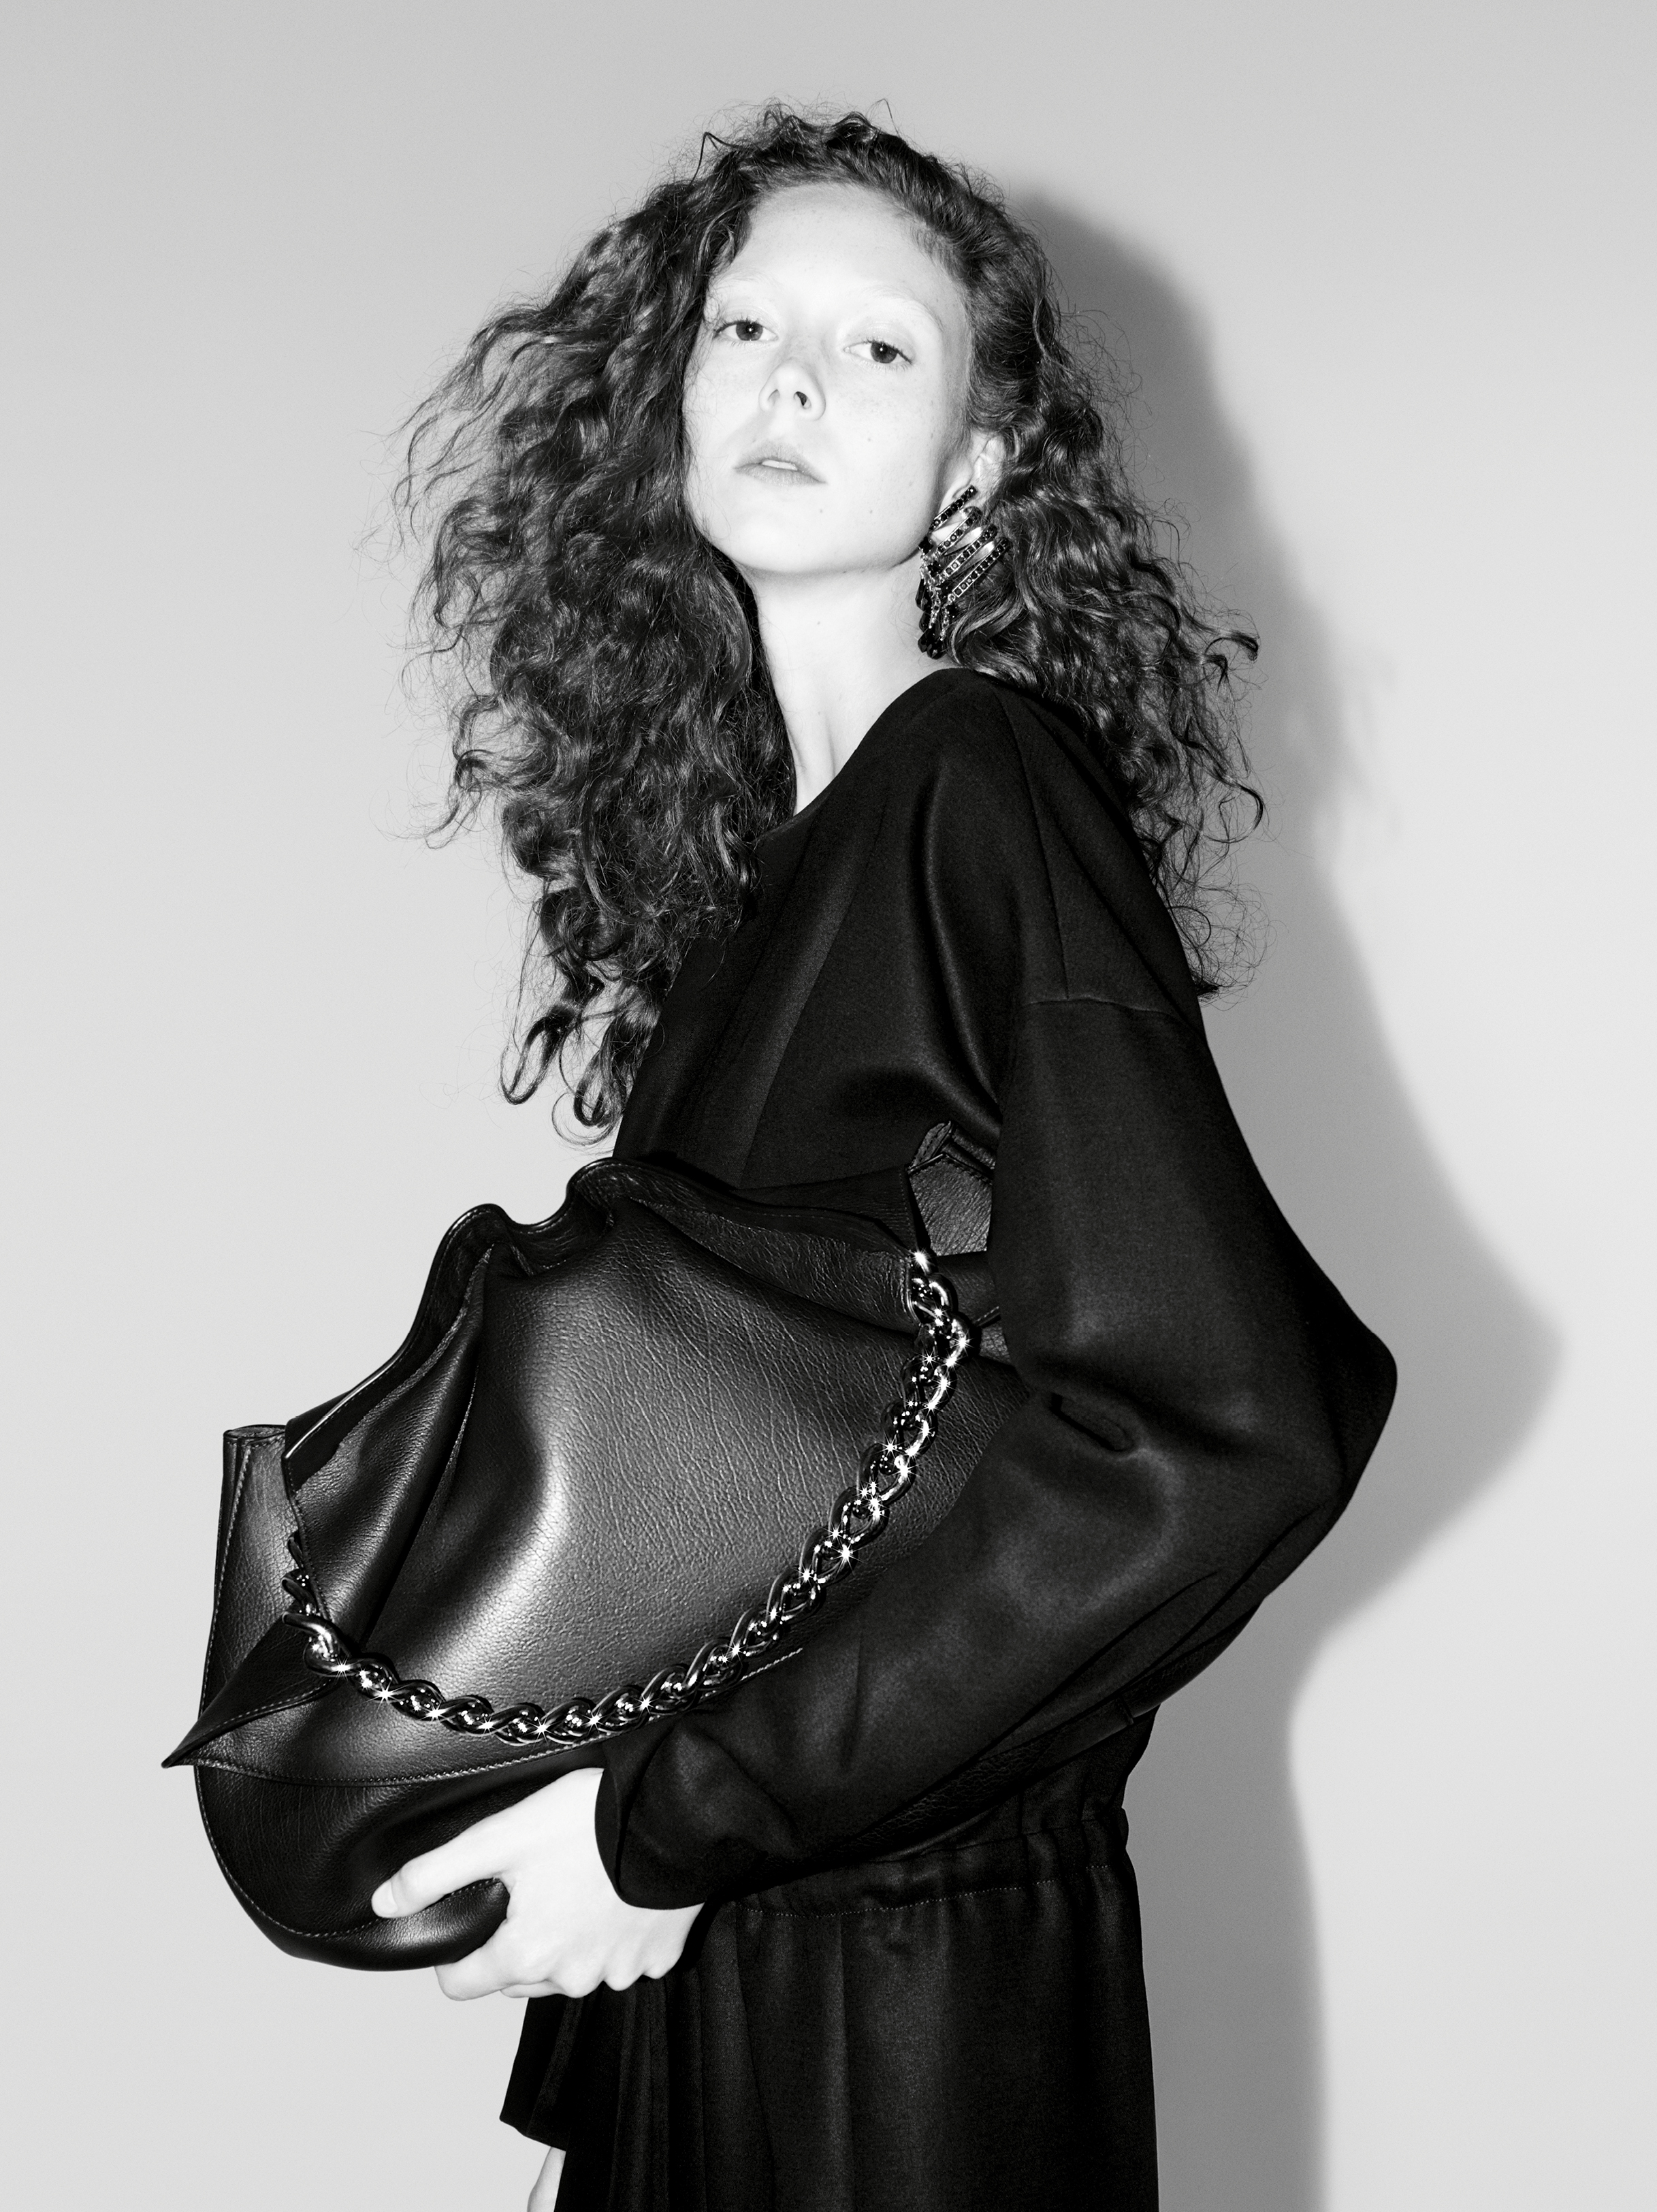 Jil Sander Unveils Spring/Summer 2017 Campaign with Natalie Westling -  Daily Front Row